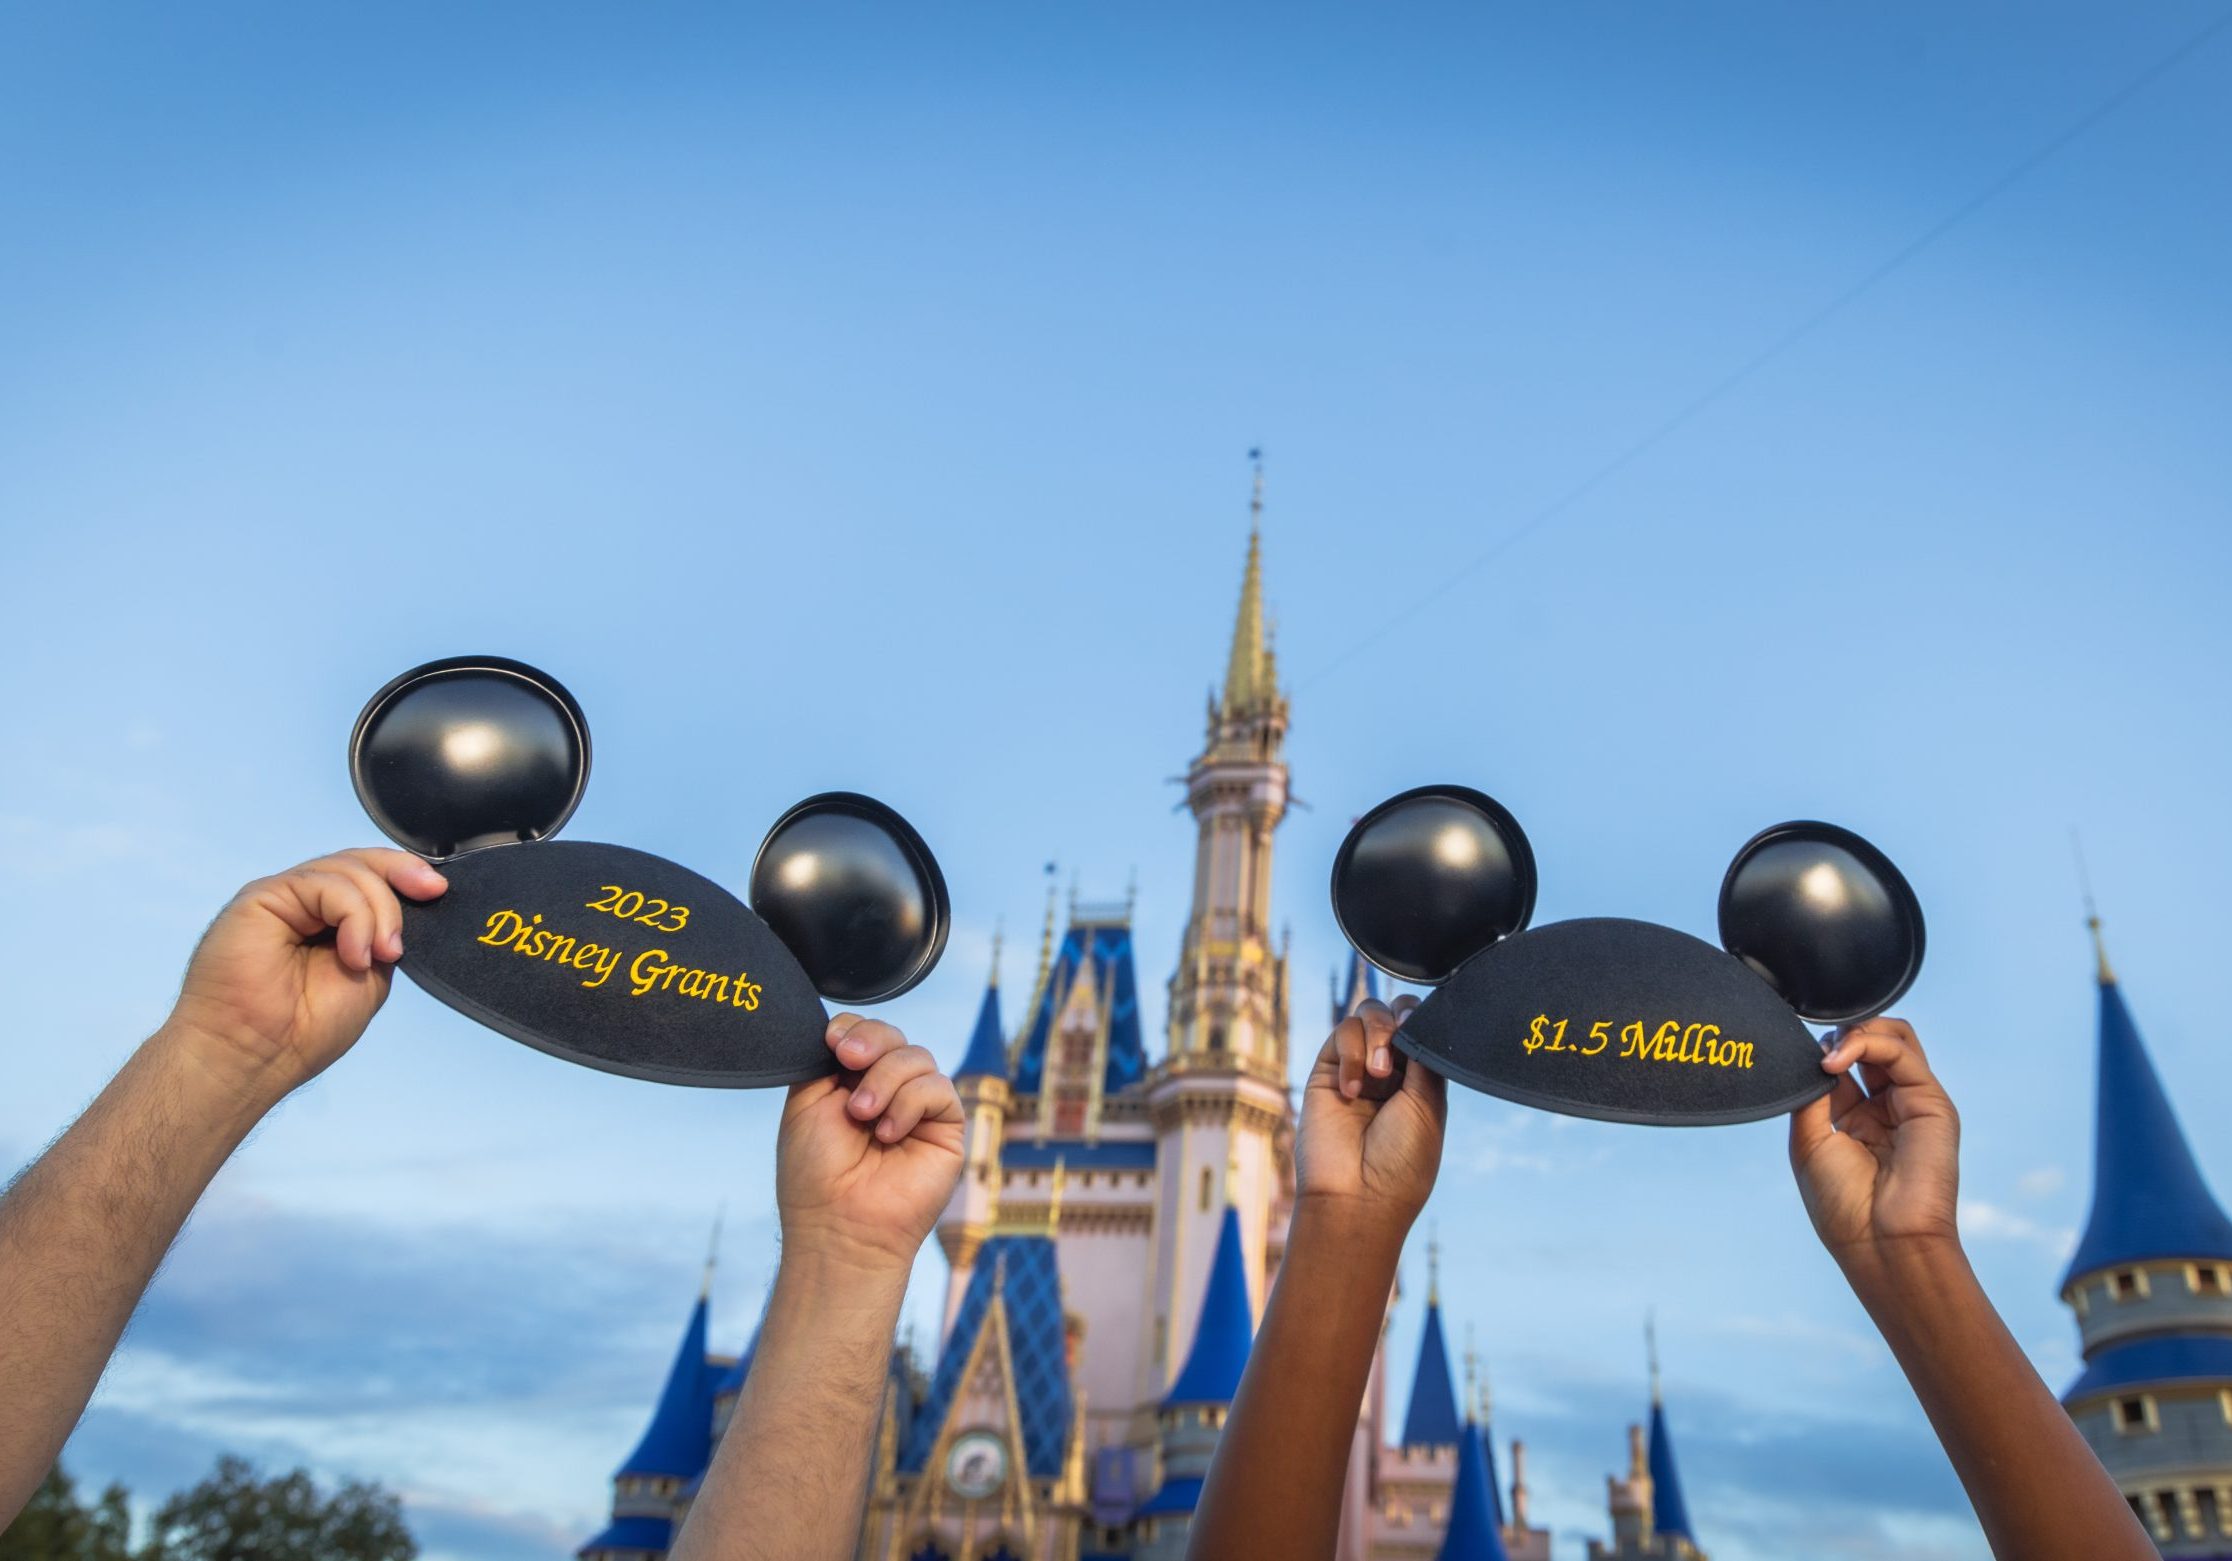 Two Mickey ear hats in front of Cinderella Castle with the embroidery saying "2023 Disney Grants" and "$1.5 million".